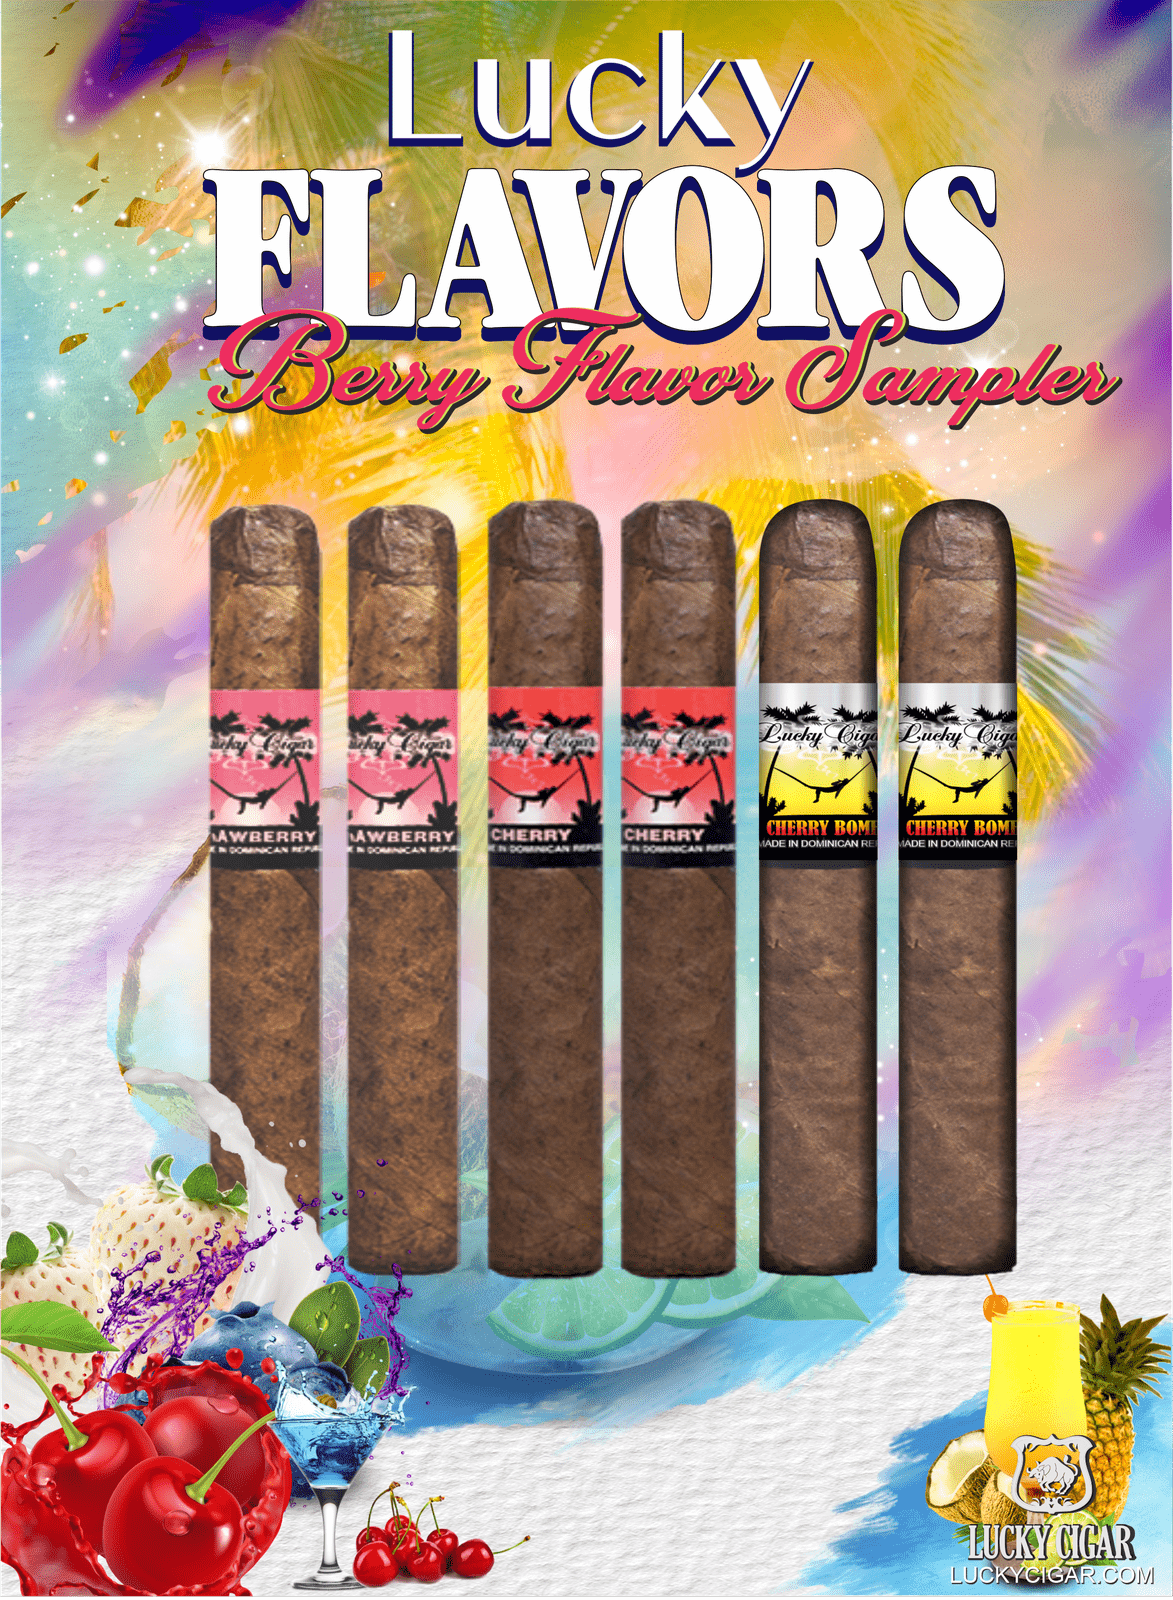 Flavored Cigars: Lucky Flavors 6 Piece Berry Fruit Sampler - Cherry Bomb, Cherry, Strawberry